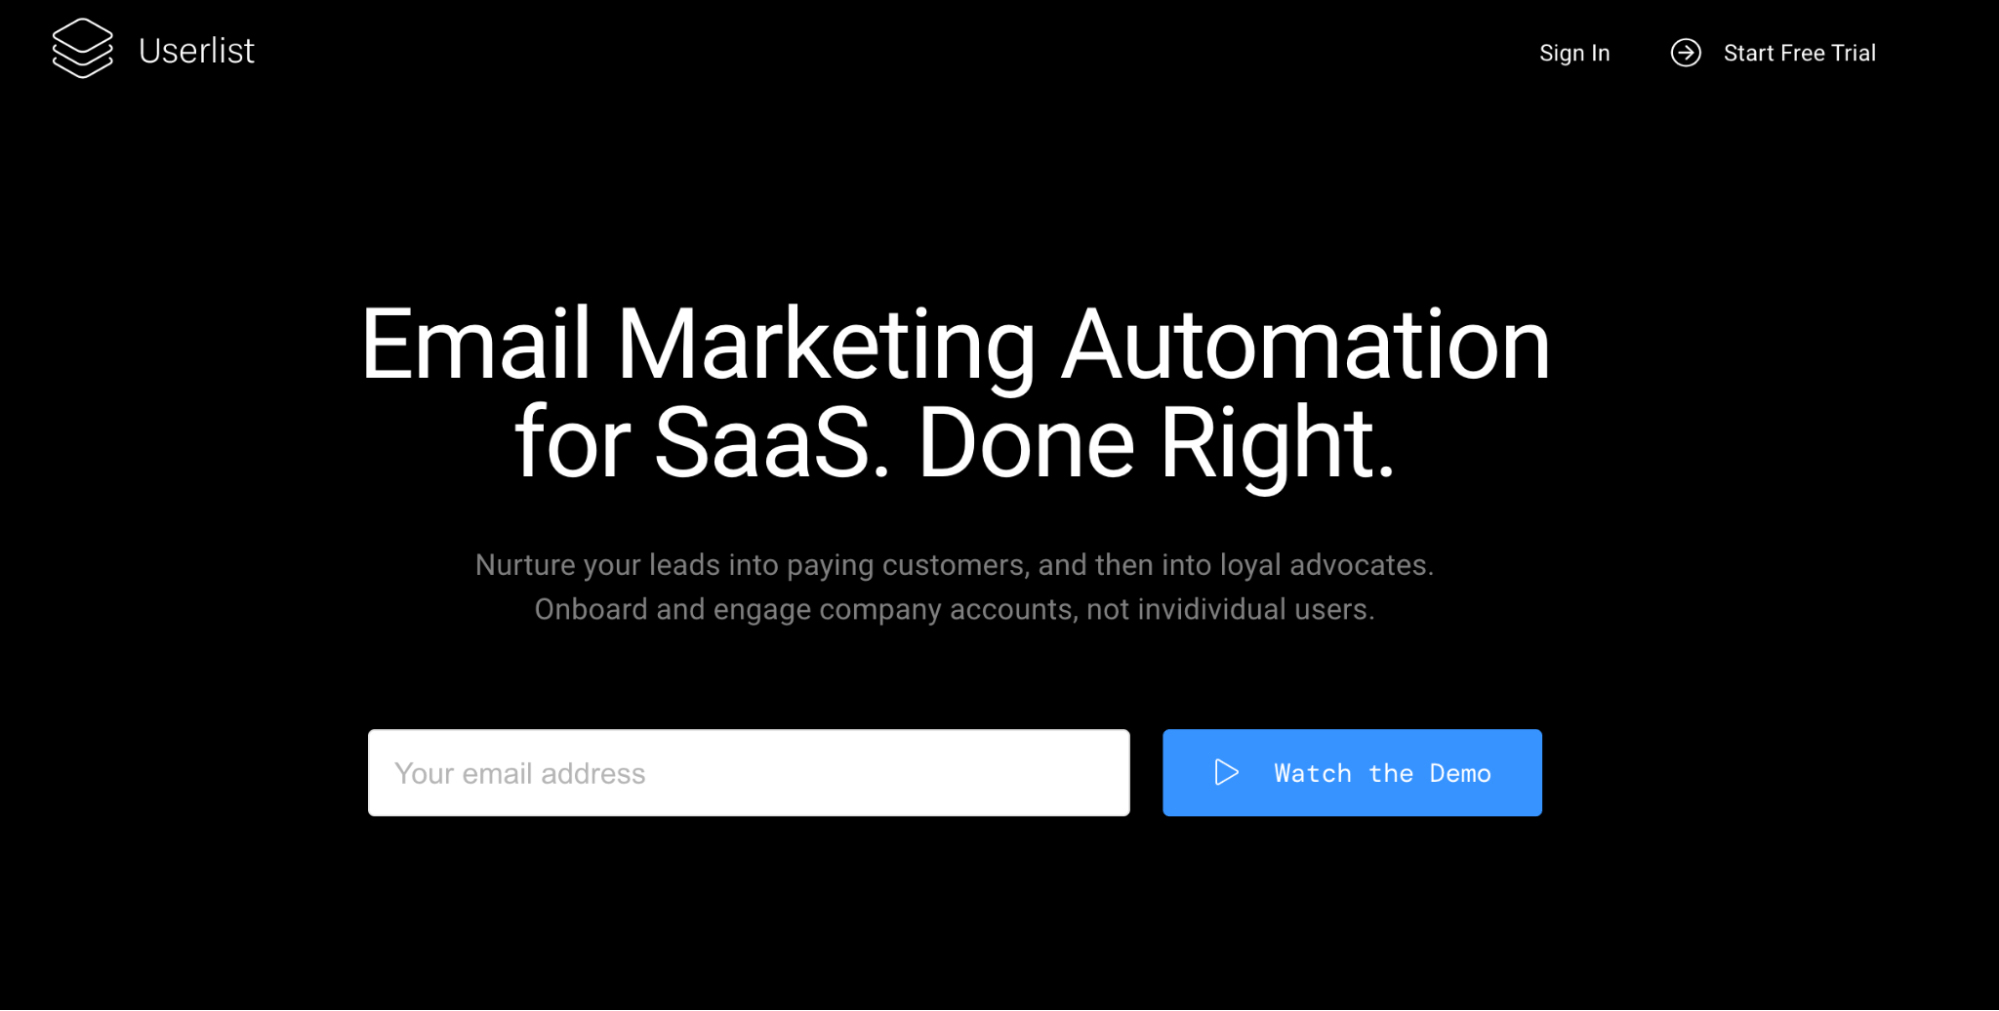 Marketing Automation for SaaS: Screenshot of Userlist